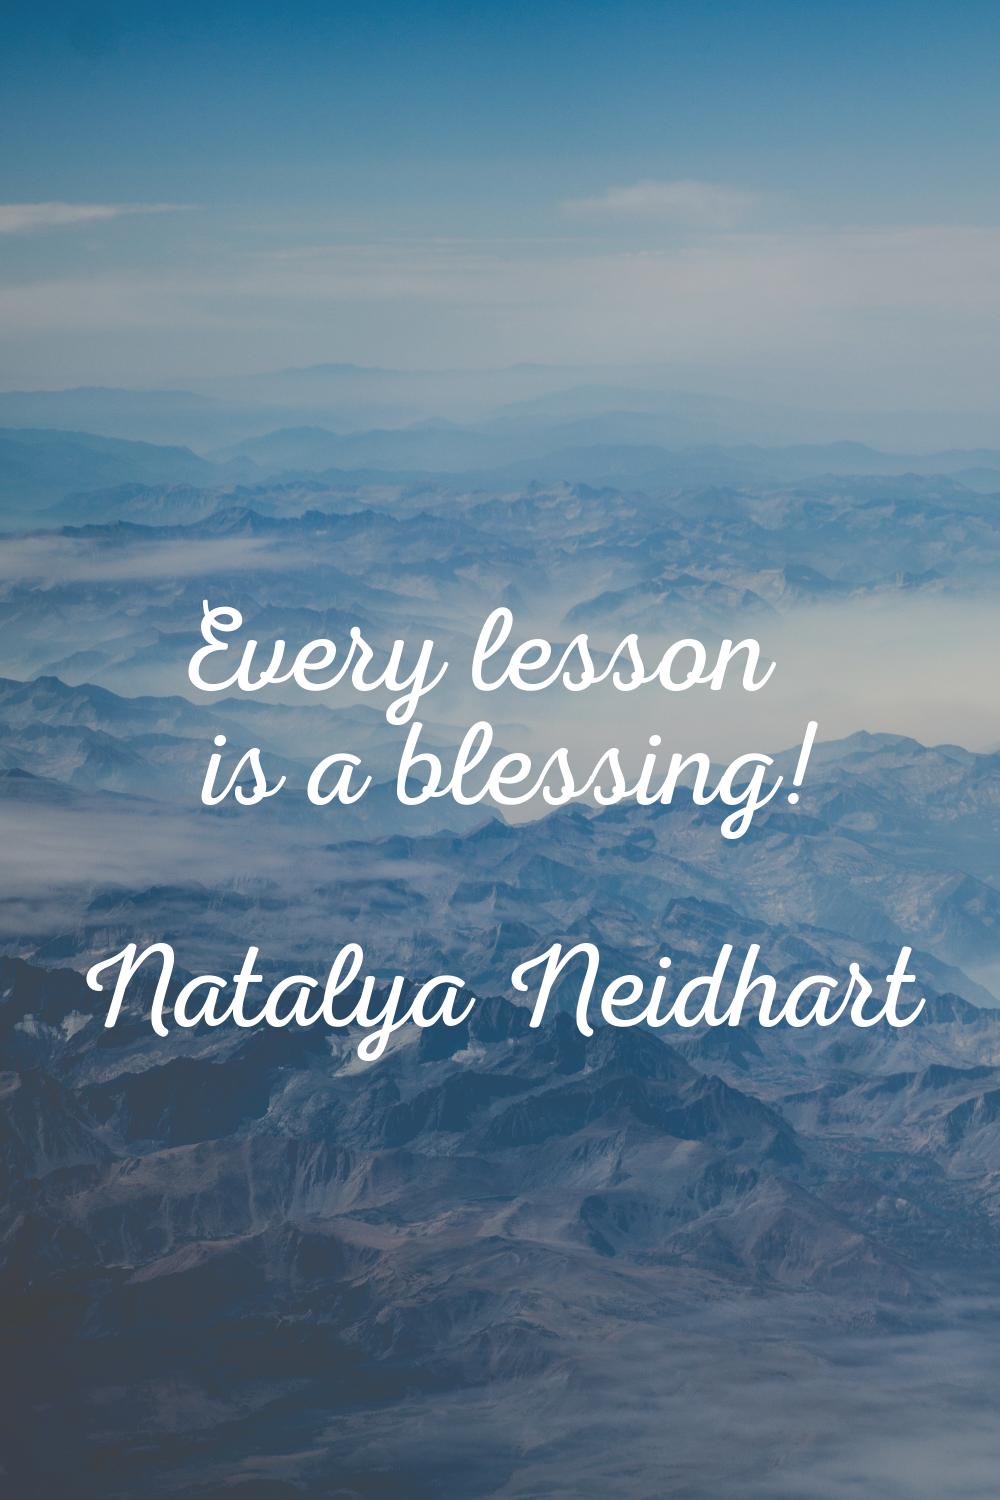 Every lesson is a blessing!